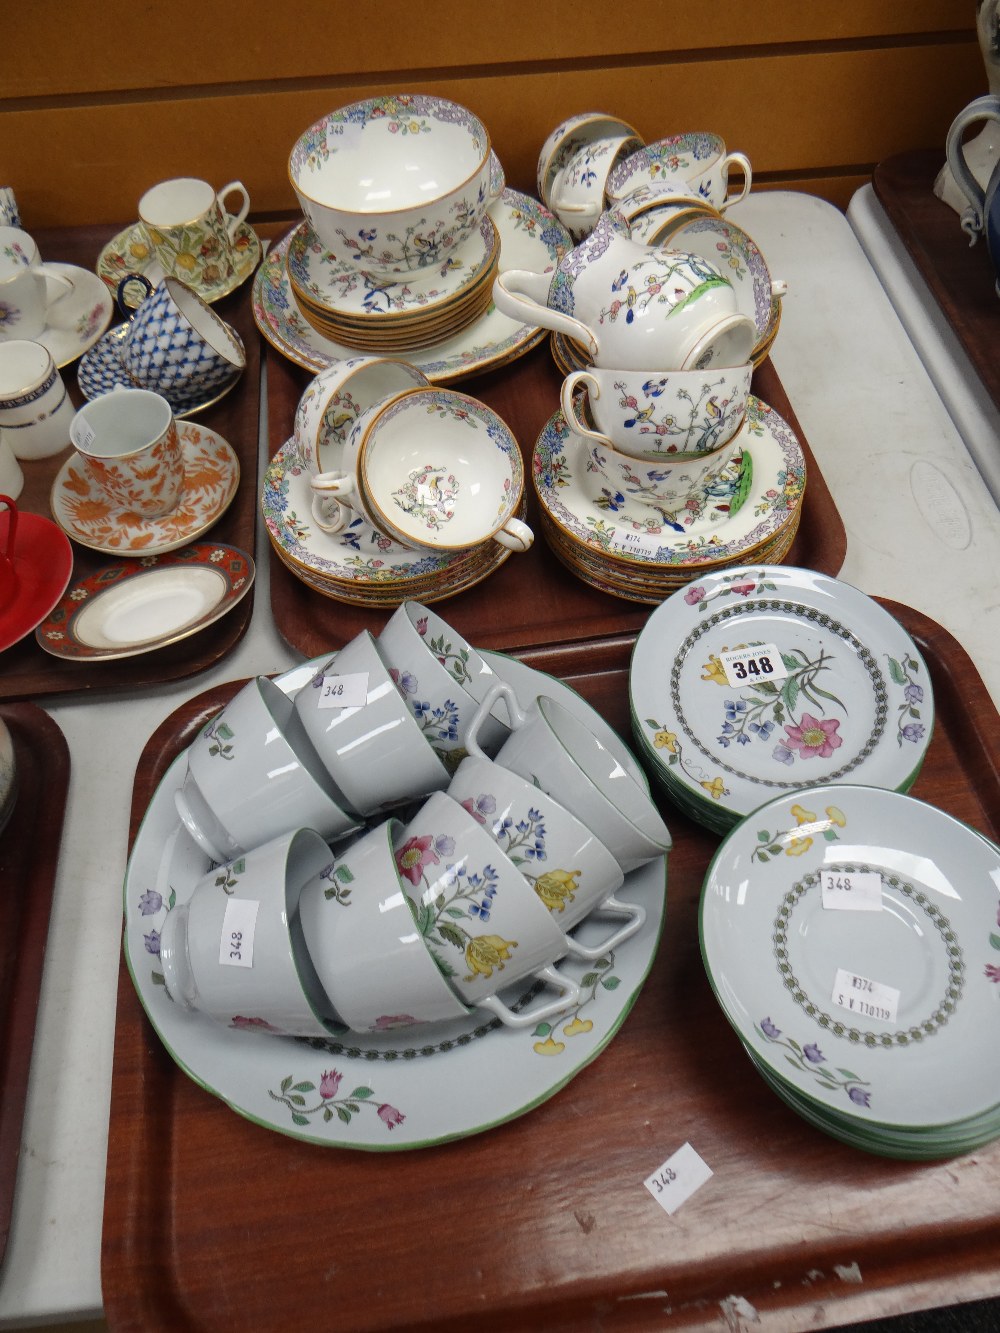 A quantity of Spode 'Summer Palace' table ware & a quantity of Minton 'Indian Tree' patterned